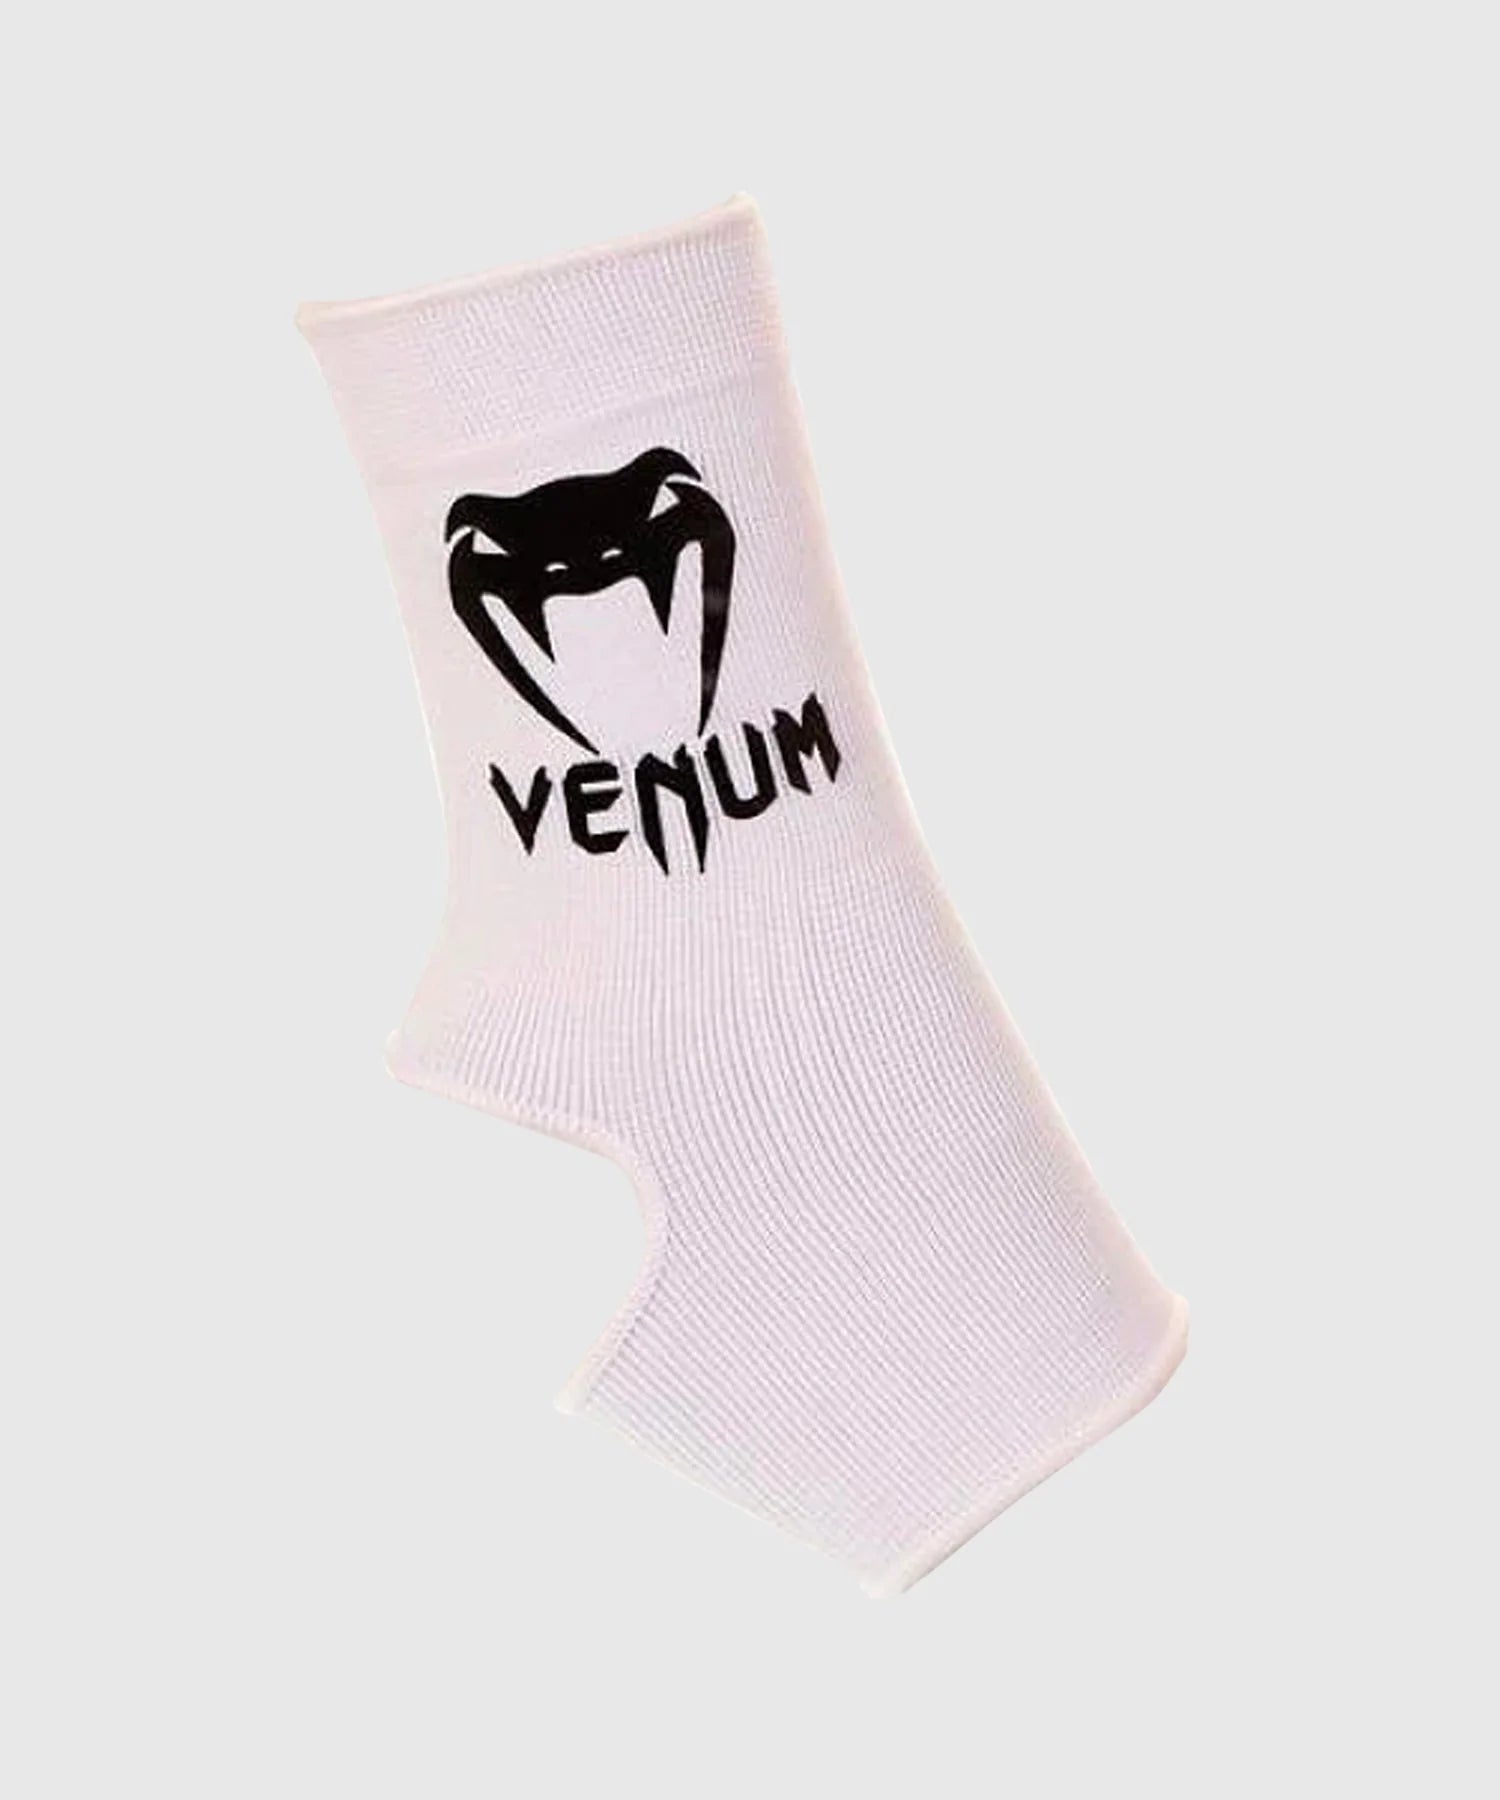 Venum Kontact Ankle Support